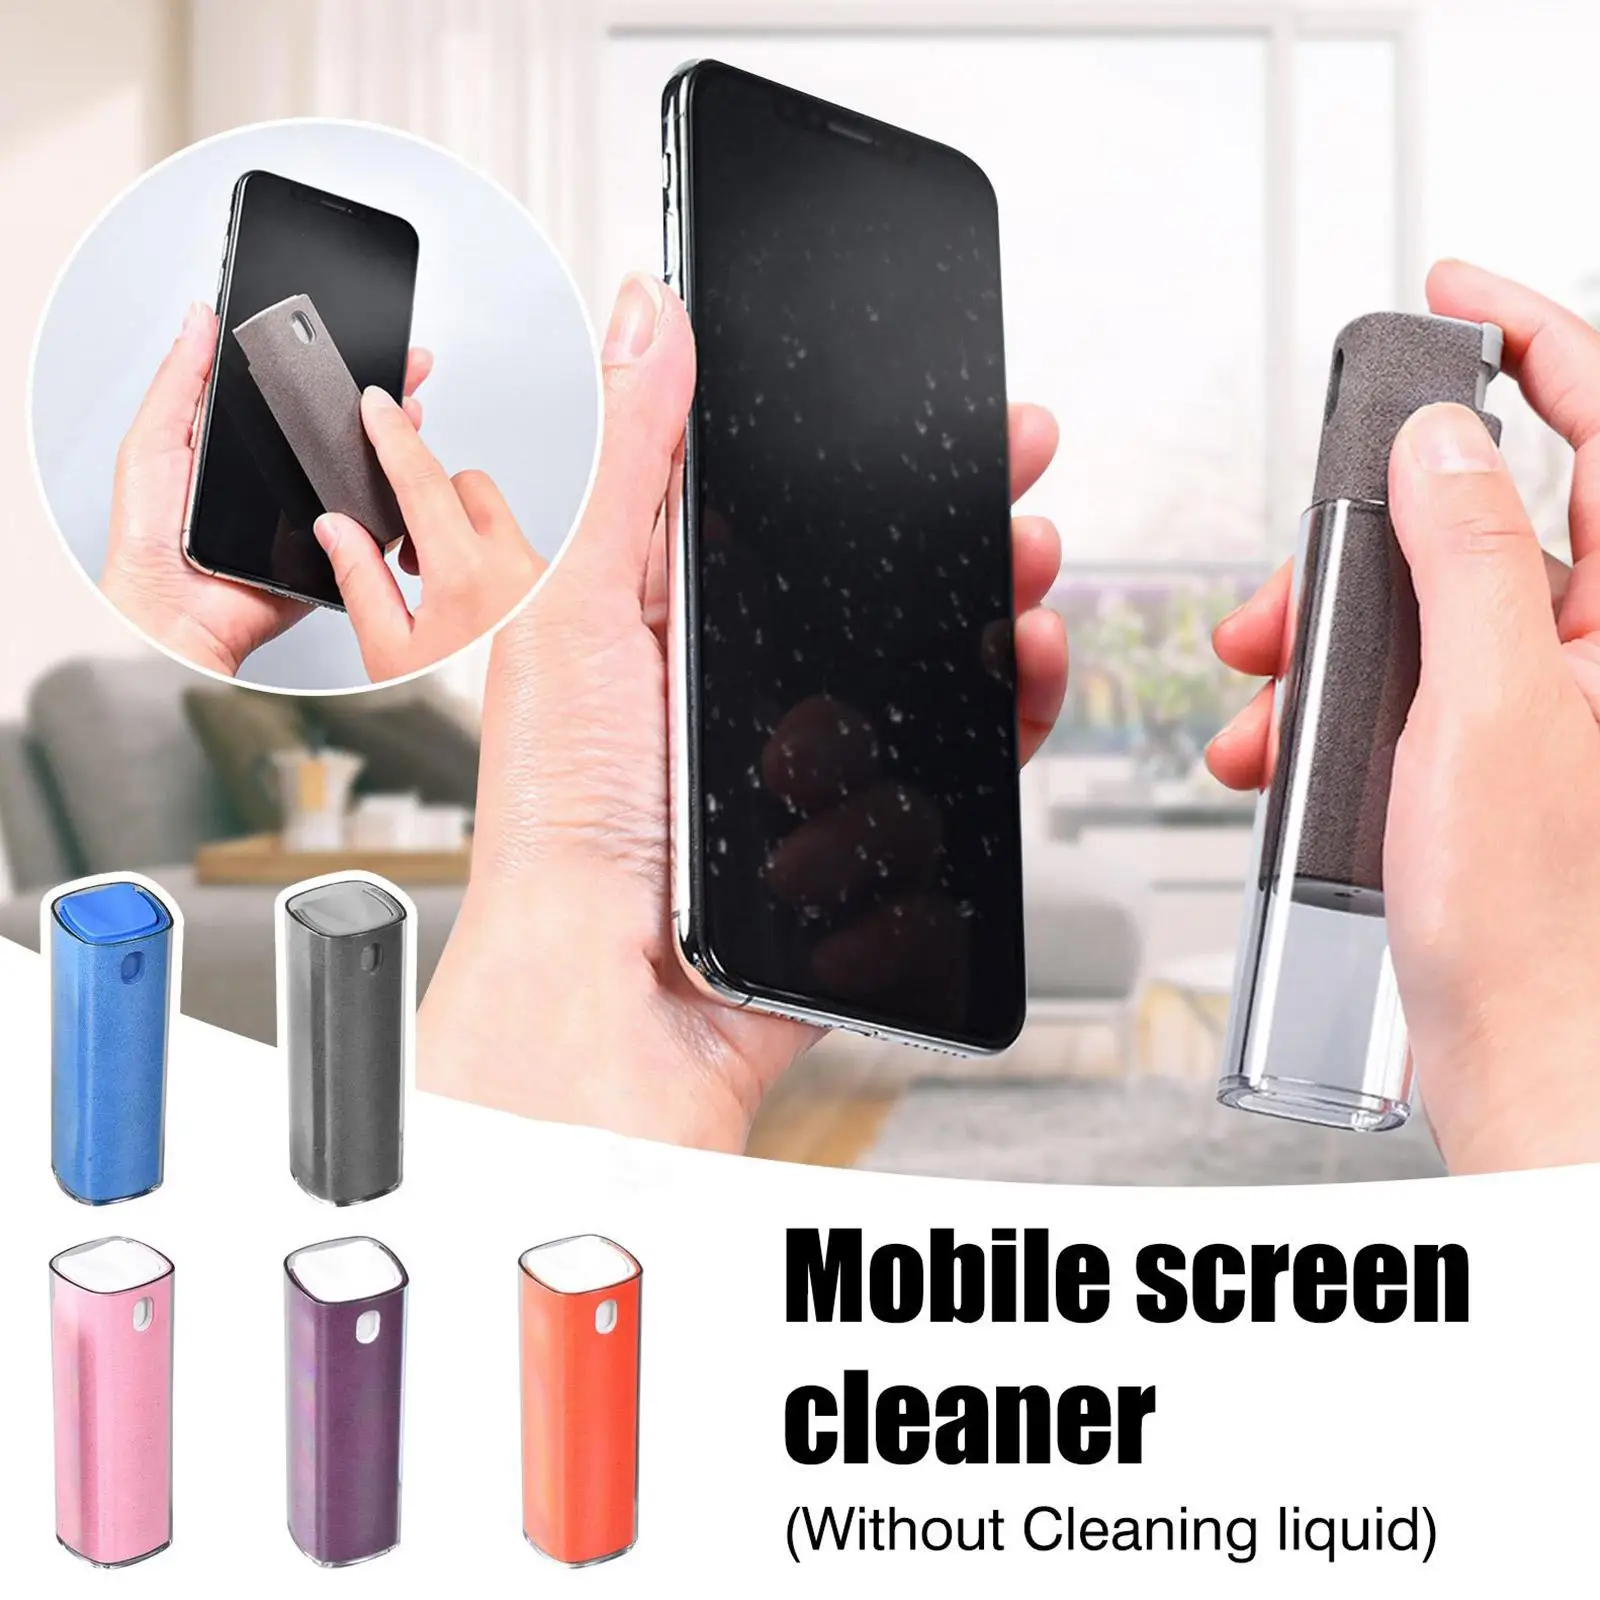 

Newest 2 In 1 Phone Screen Cleaner Spray Computer Mobile Cleaning Tool Removal Cloth Artifact Screen Phone Microfiber Dust F4y7